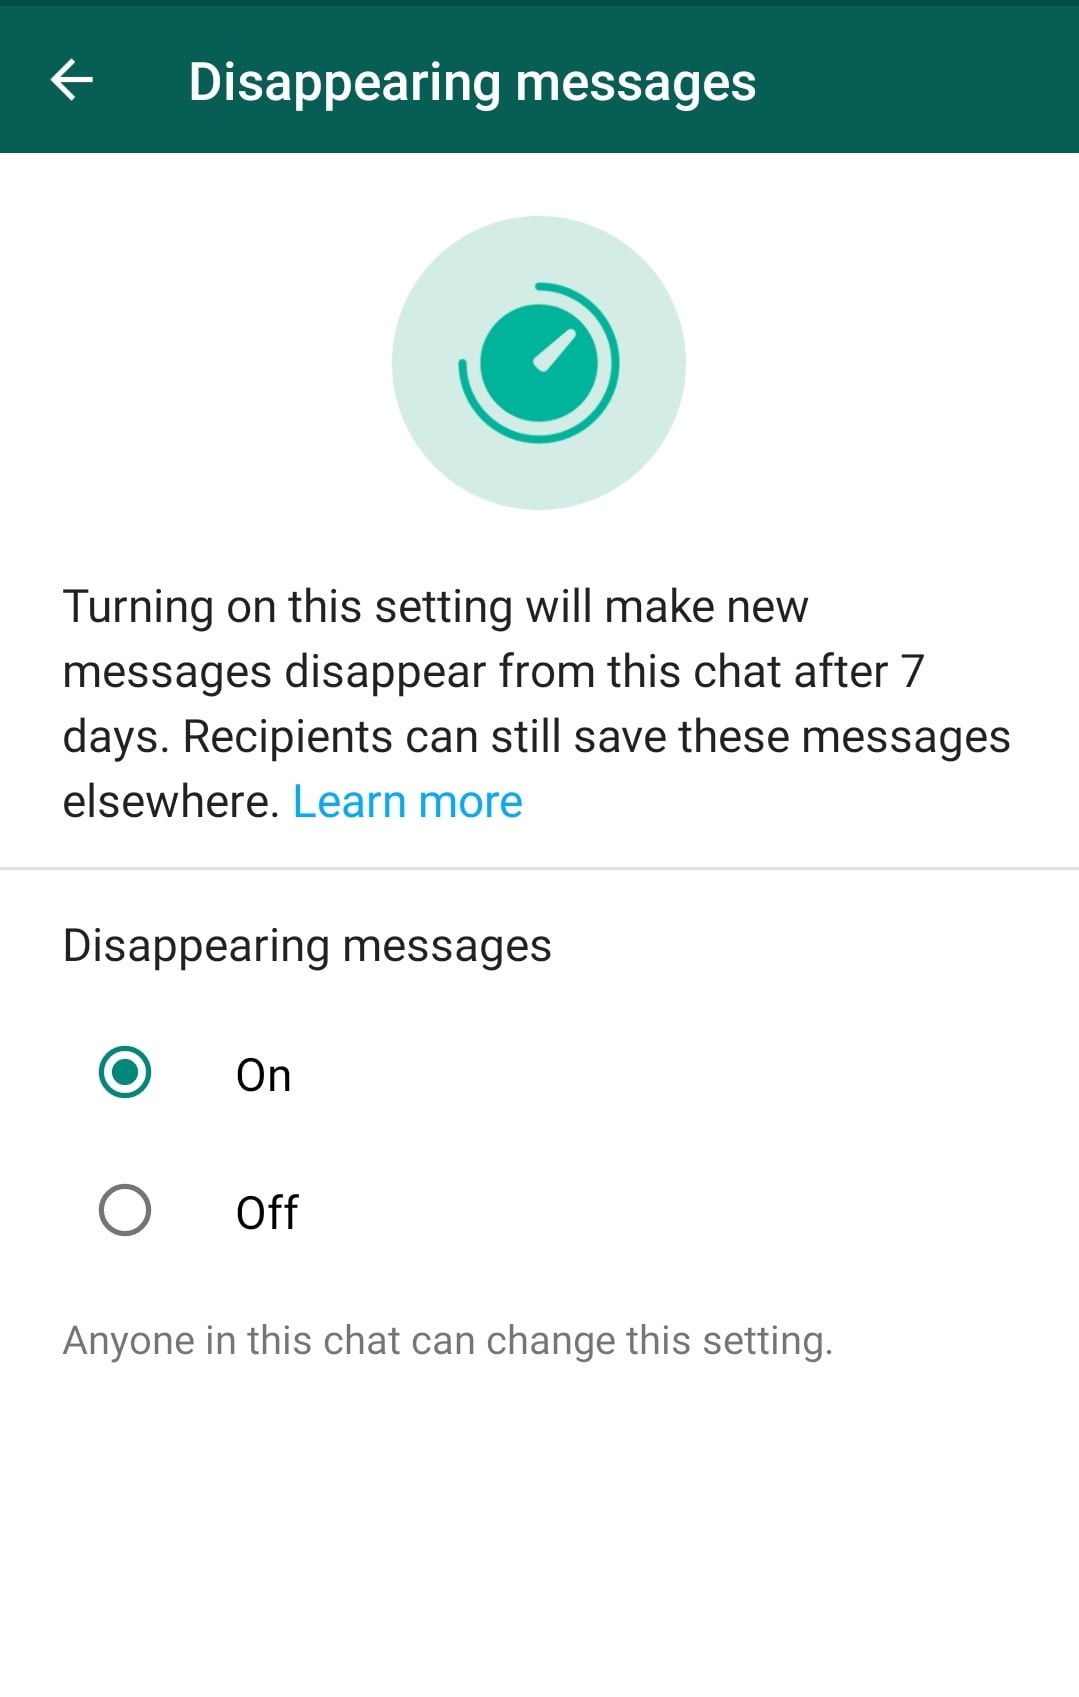 how to send disappearing messages on whatsapp 2